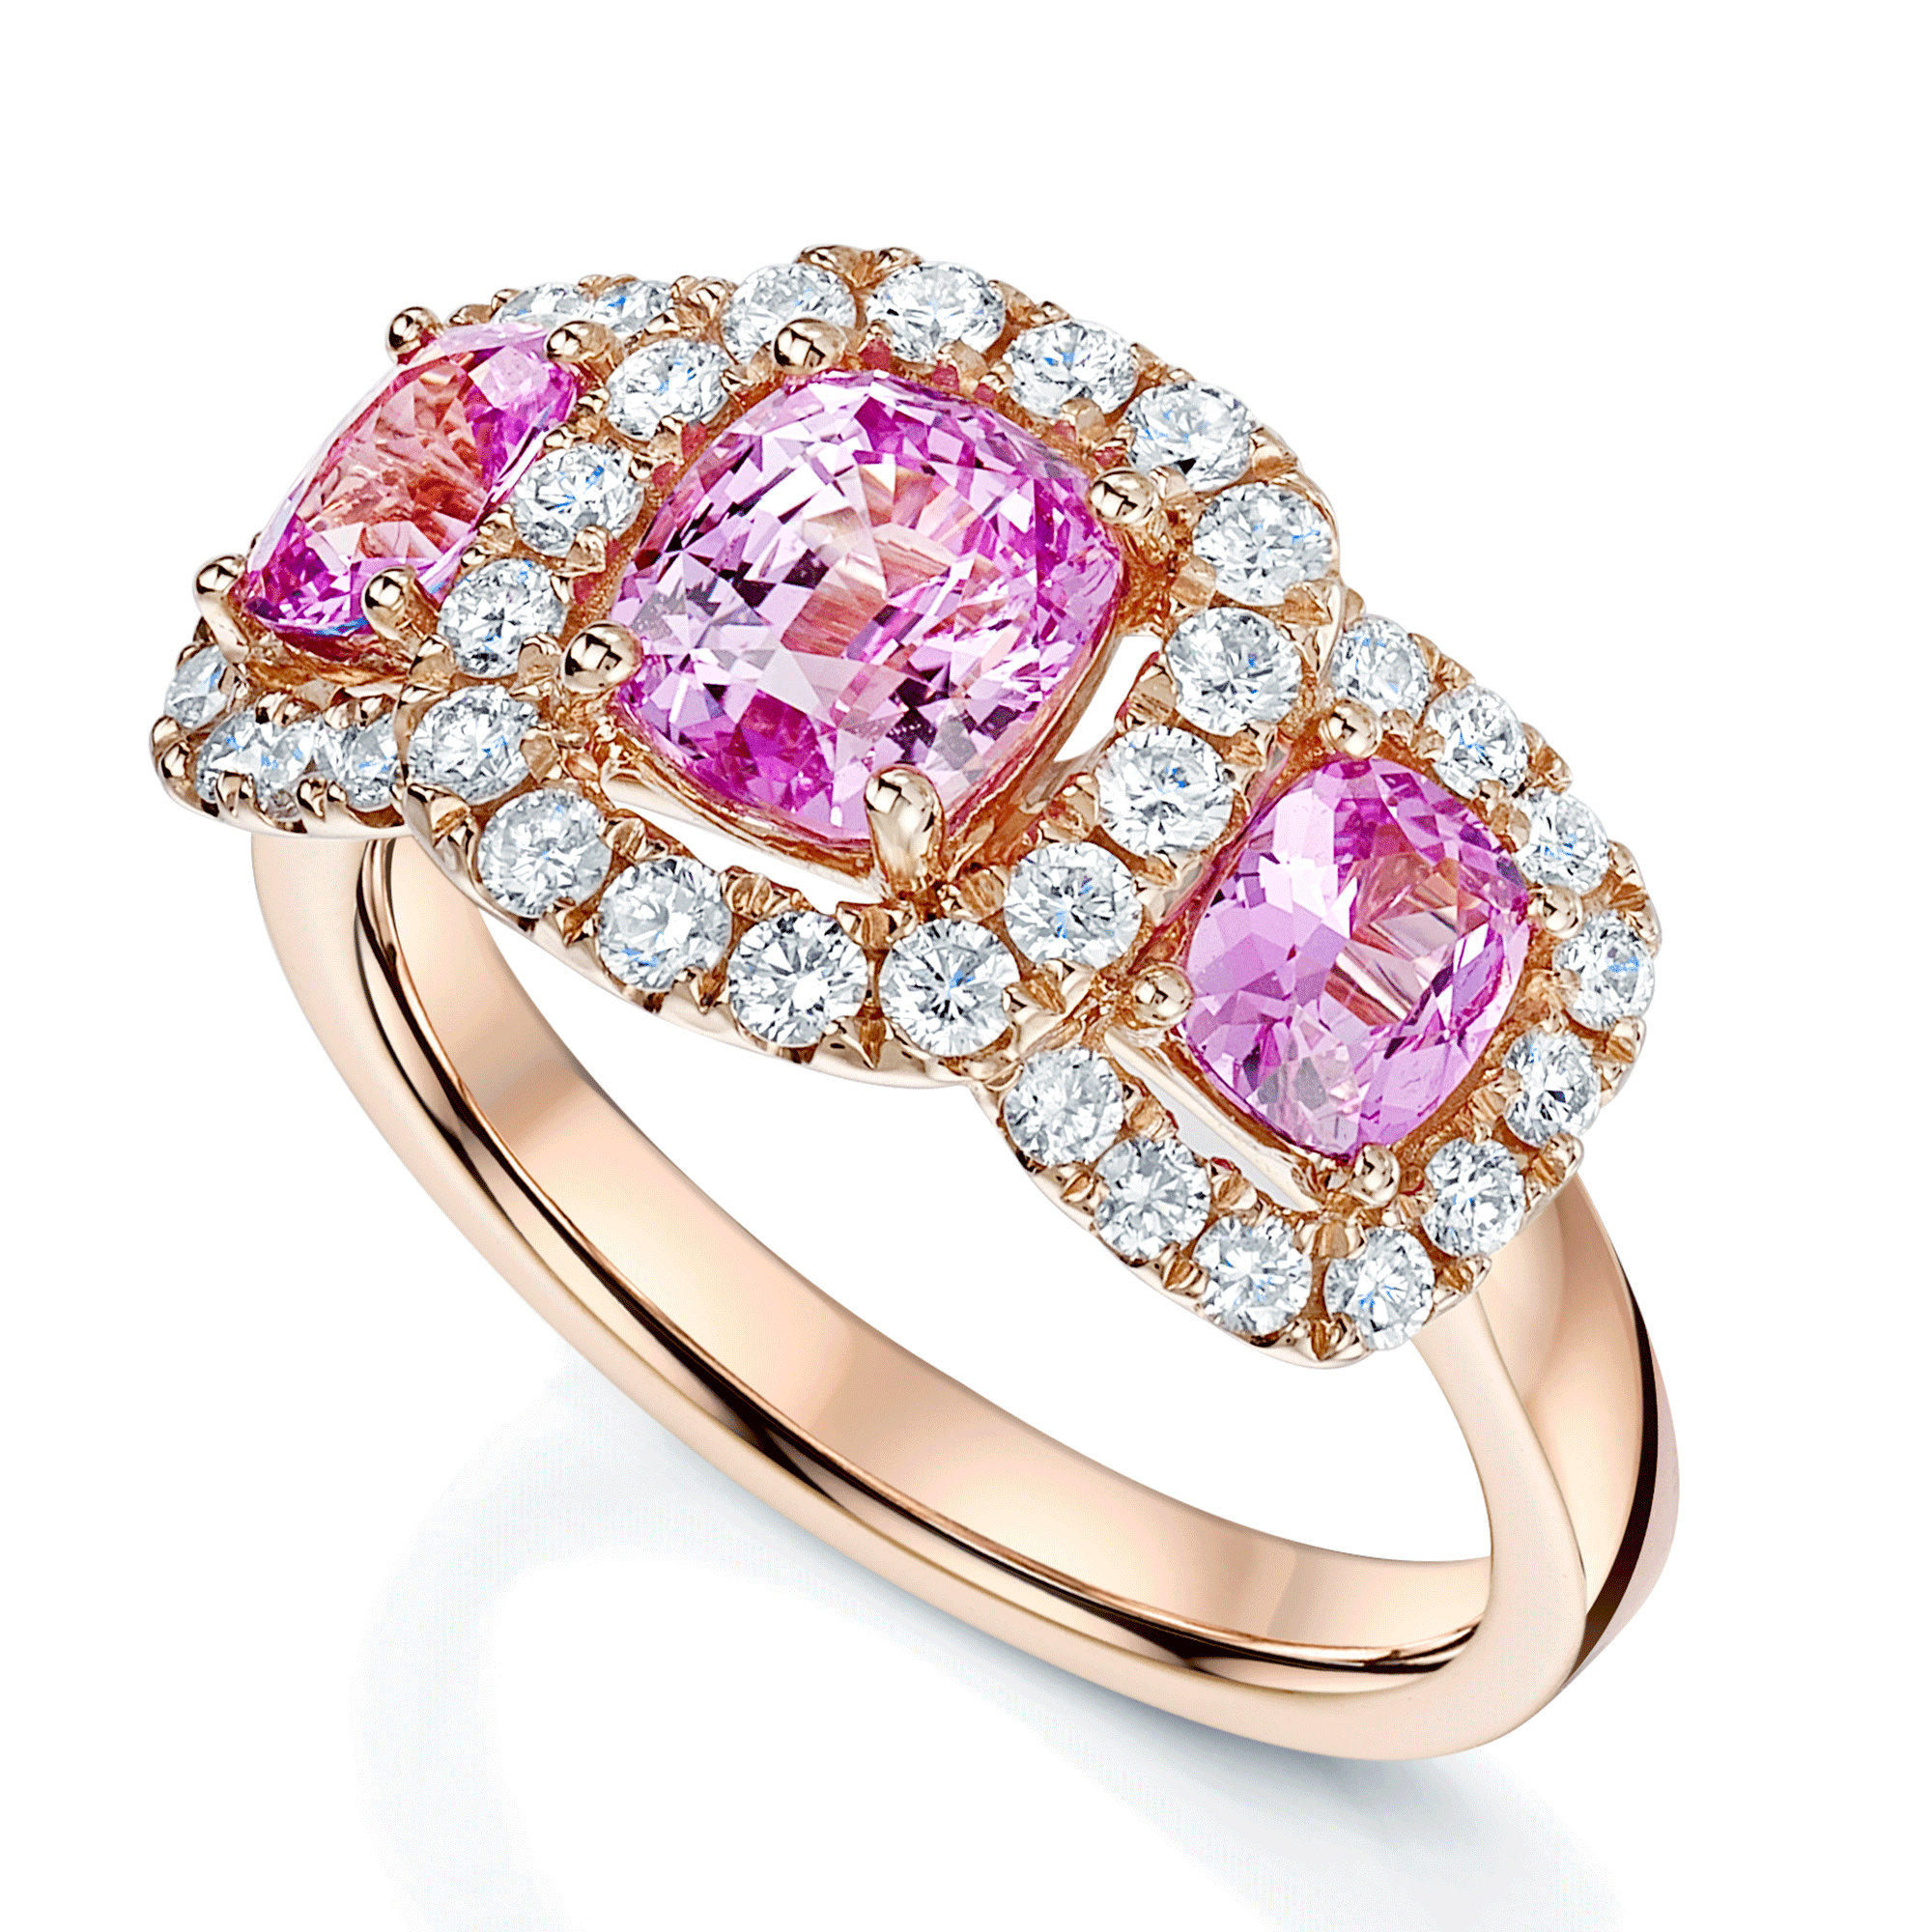 18ct Rose Gold Cushion Cut Pink Sapphire Three Stone Ring In A Diamond Halo Setting